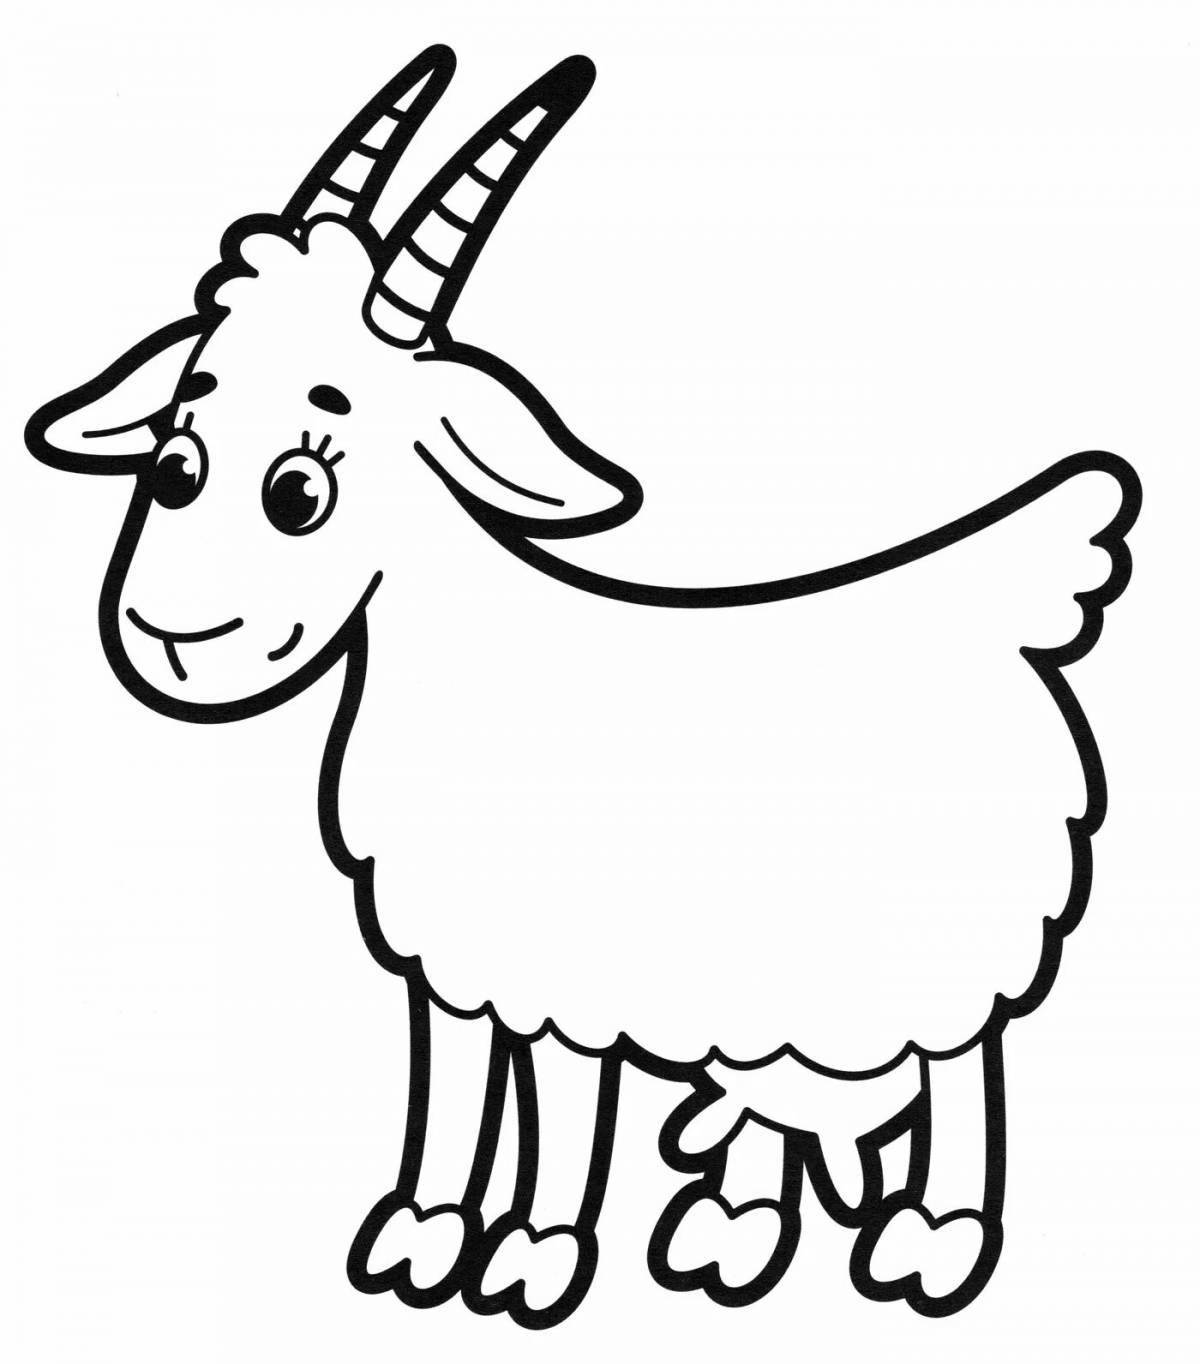 Weird goat coloring book for kids